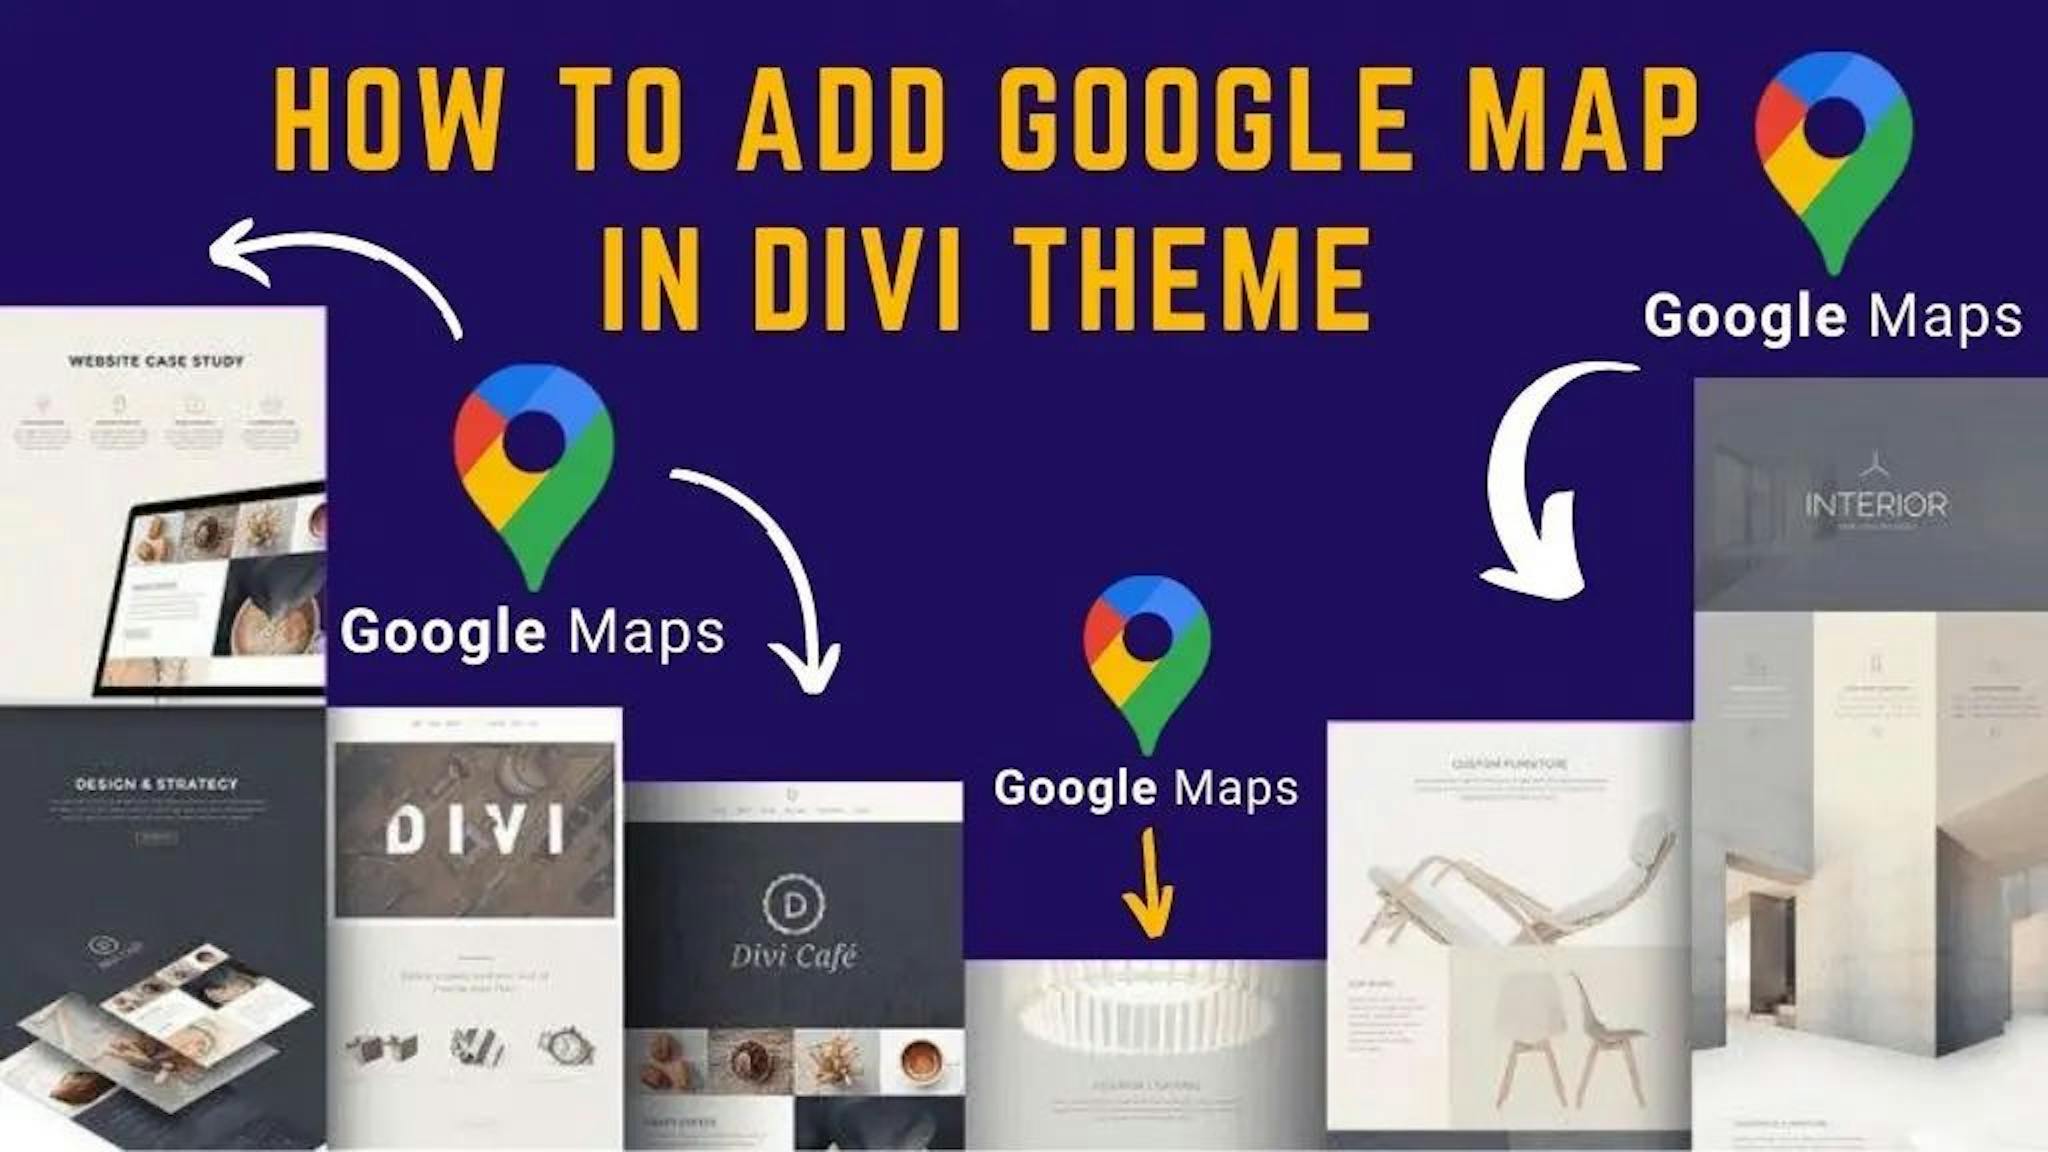 featured image - How to Add Google Map in Divi Theme